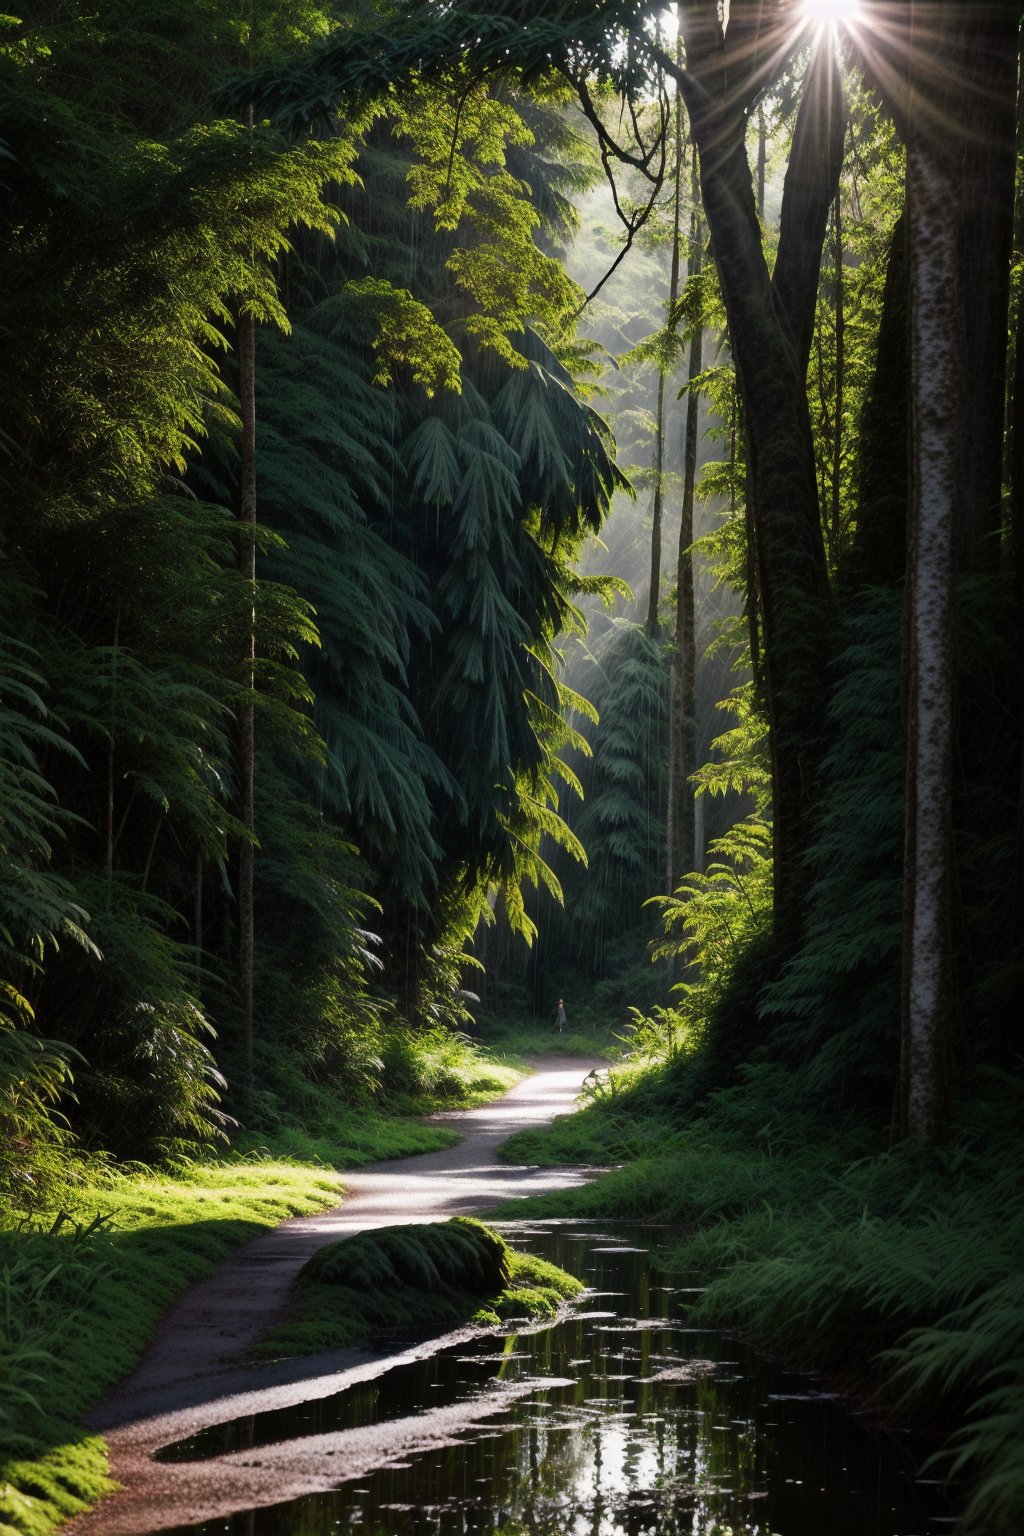 Deep within the rainforest, tall green lush trees, ferns, and flowers, along with animal life, blanket the forest floor. Sunset streams through the tree canopy, creating a scene that is both beautiful and serene, as rain softly descends. deer in the background,,inch0226b